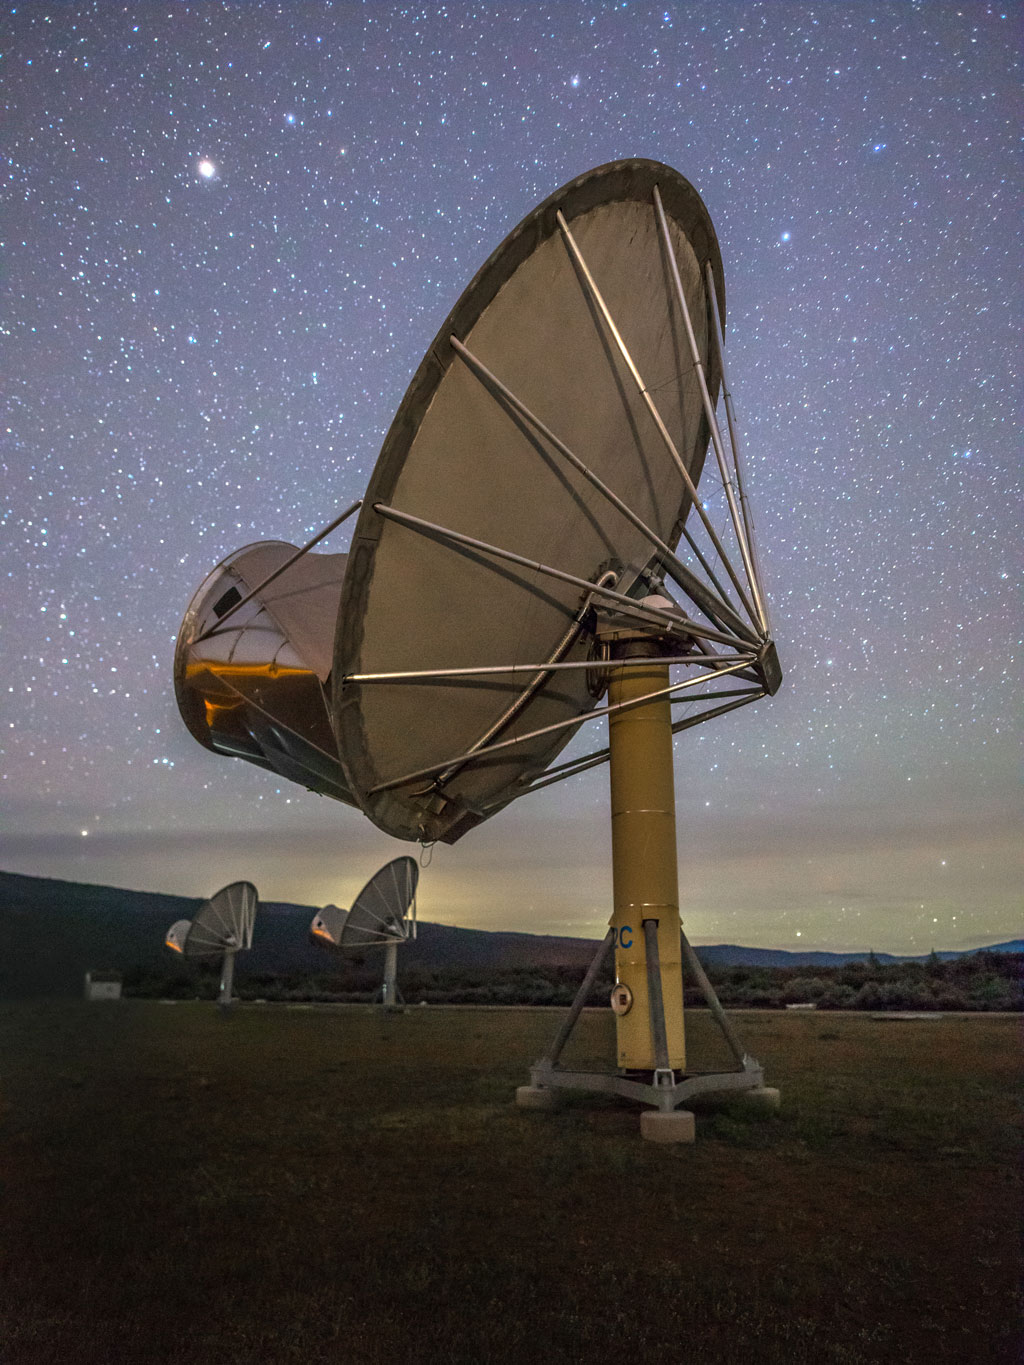 SETI Institute and Oxford University Astronomers Discover Early Radio Emission from a Spectacular Cosmic Explosion